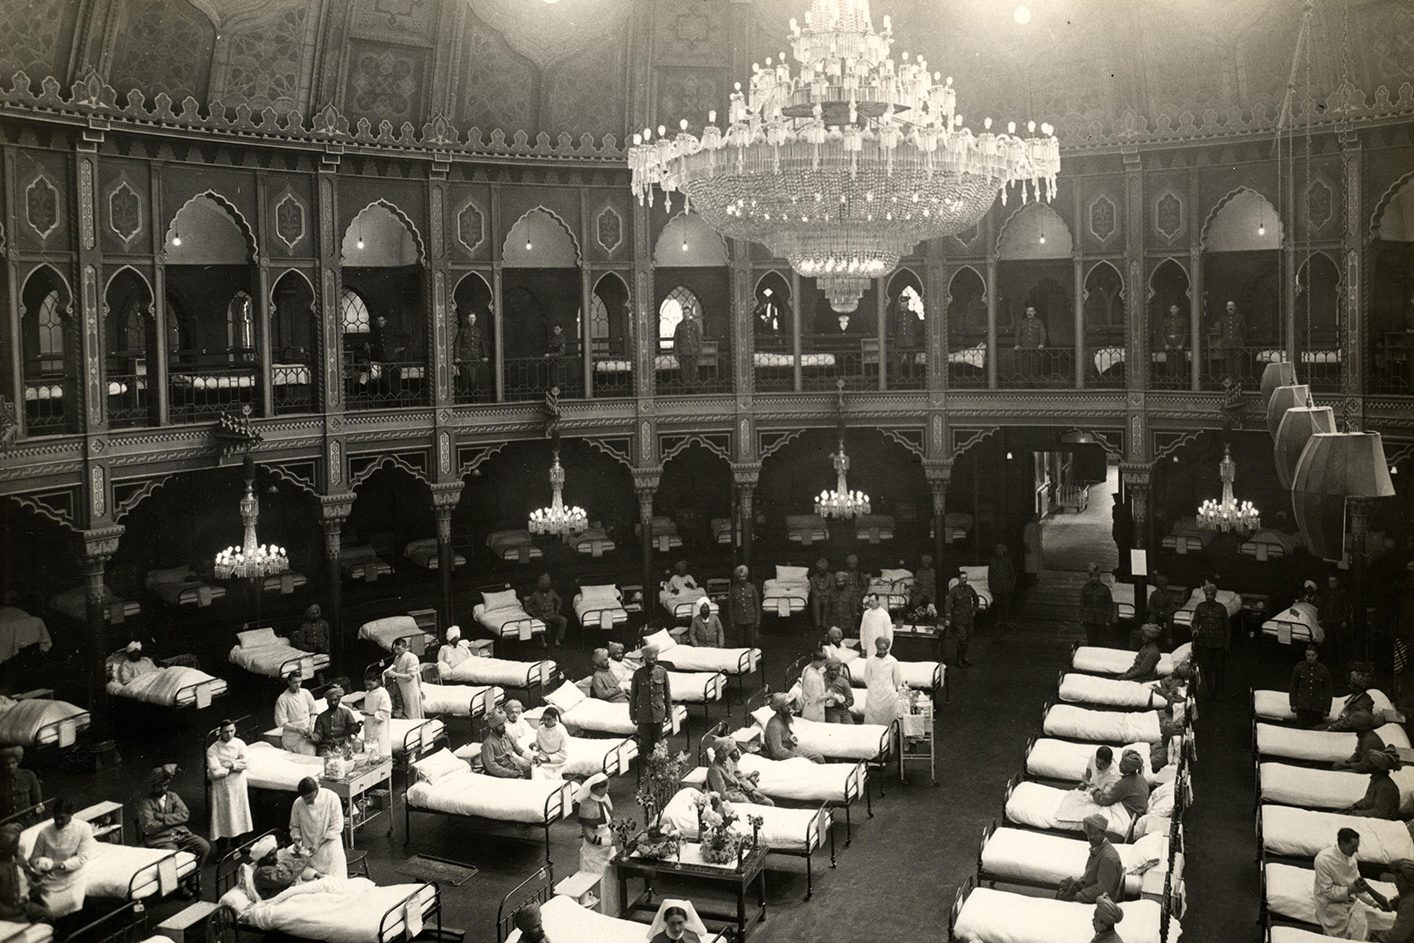 patients lined up in beds in an old hospital